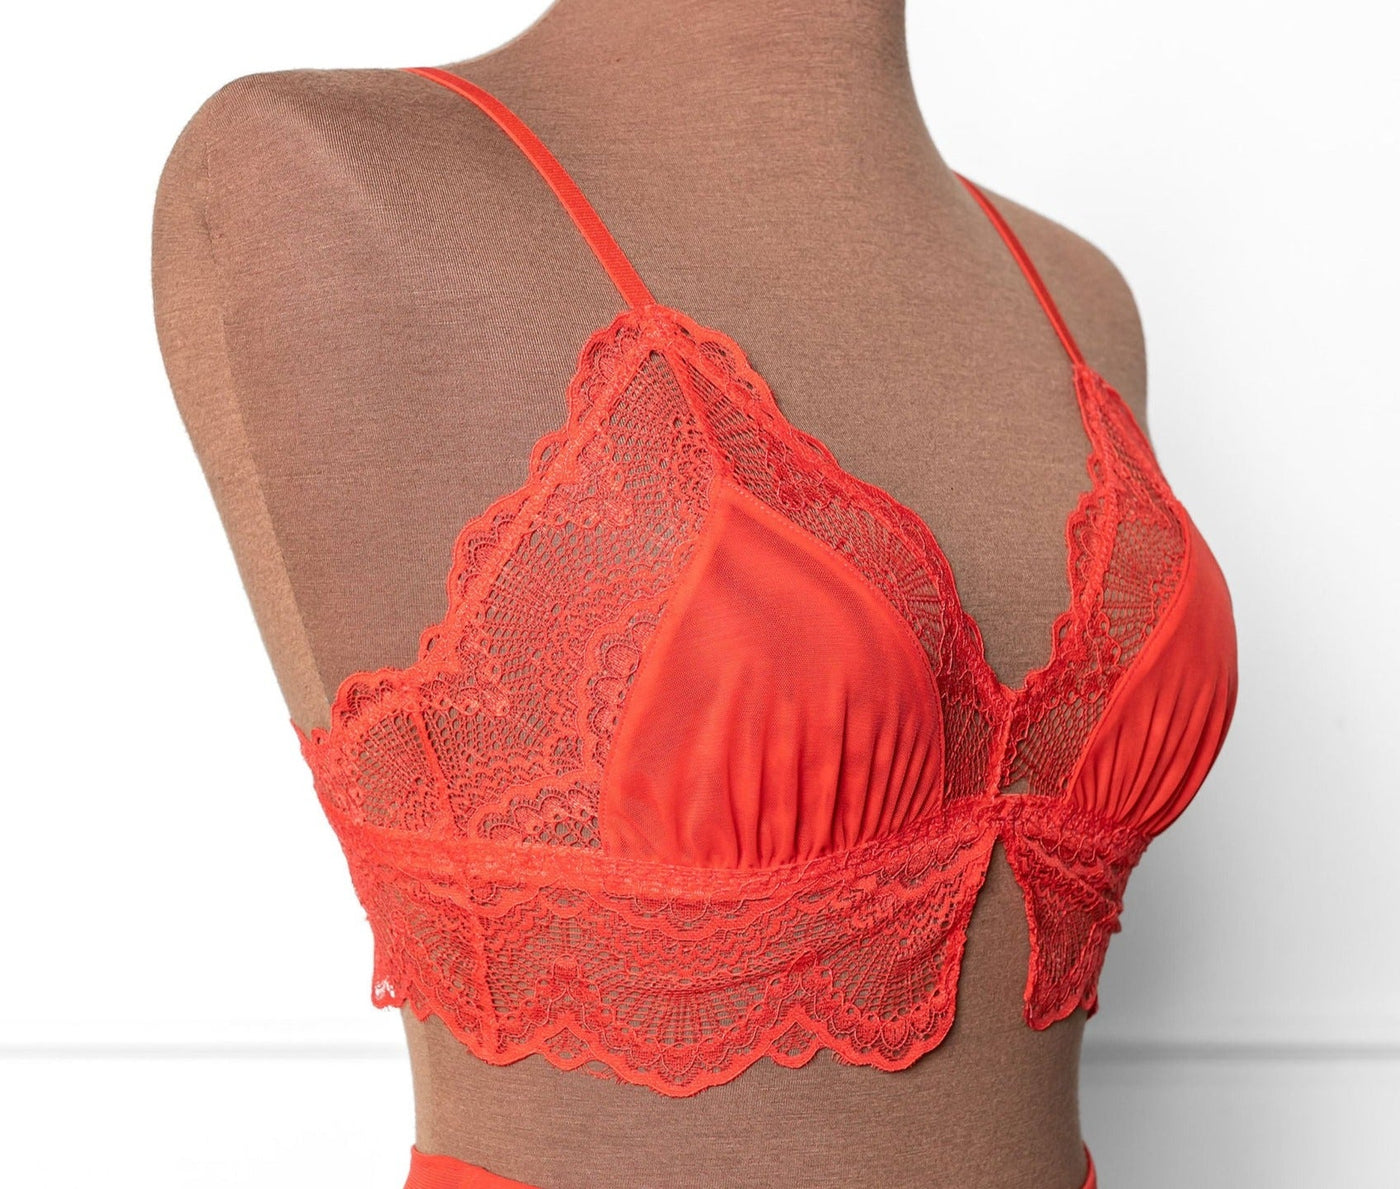 Lace & Mesh Bralette - Poppy Red - Mentionables